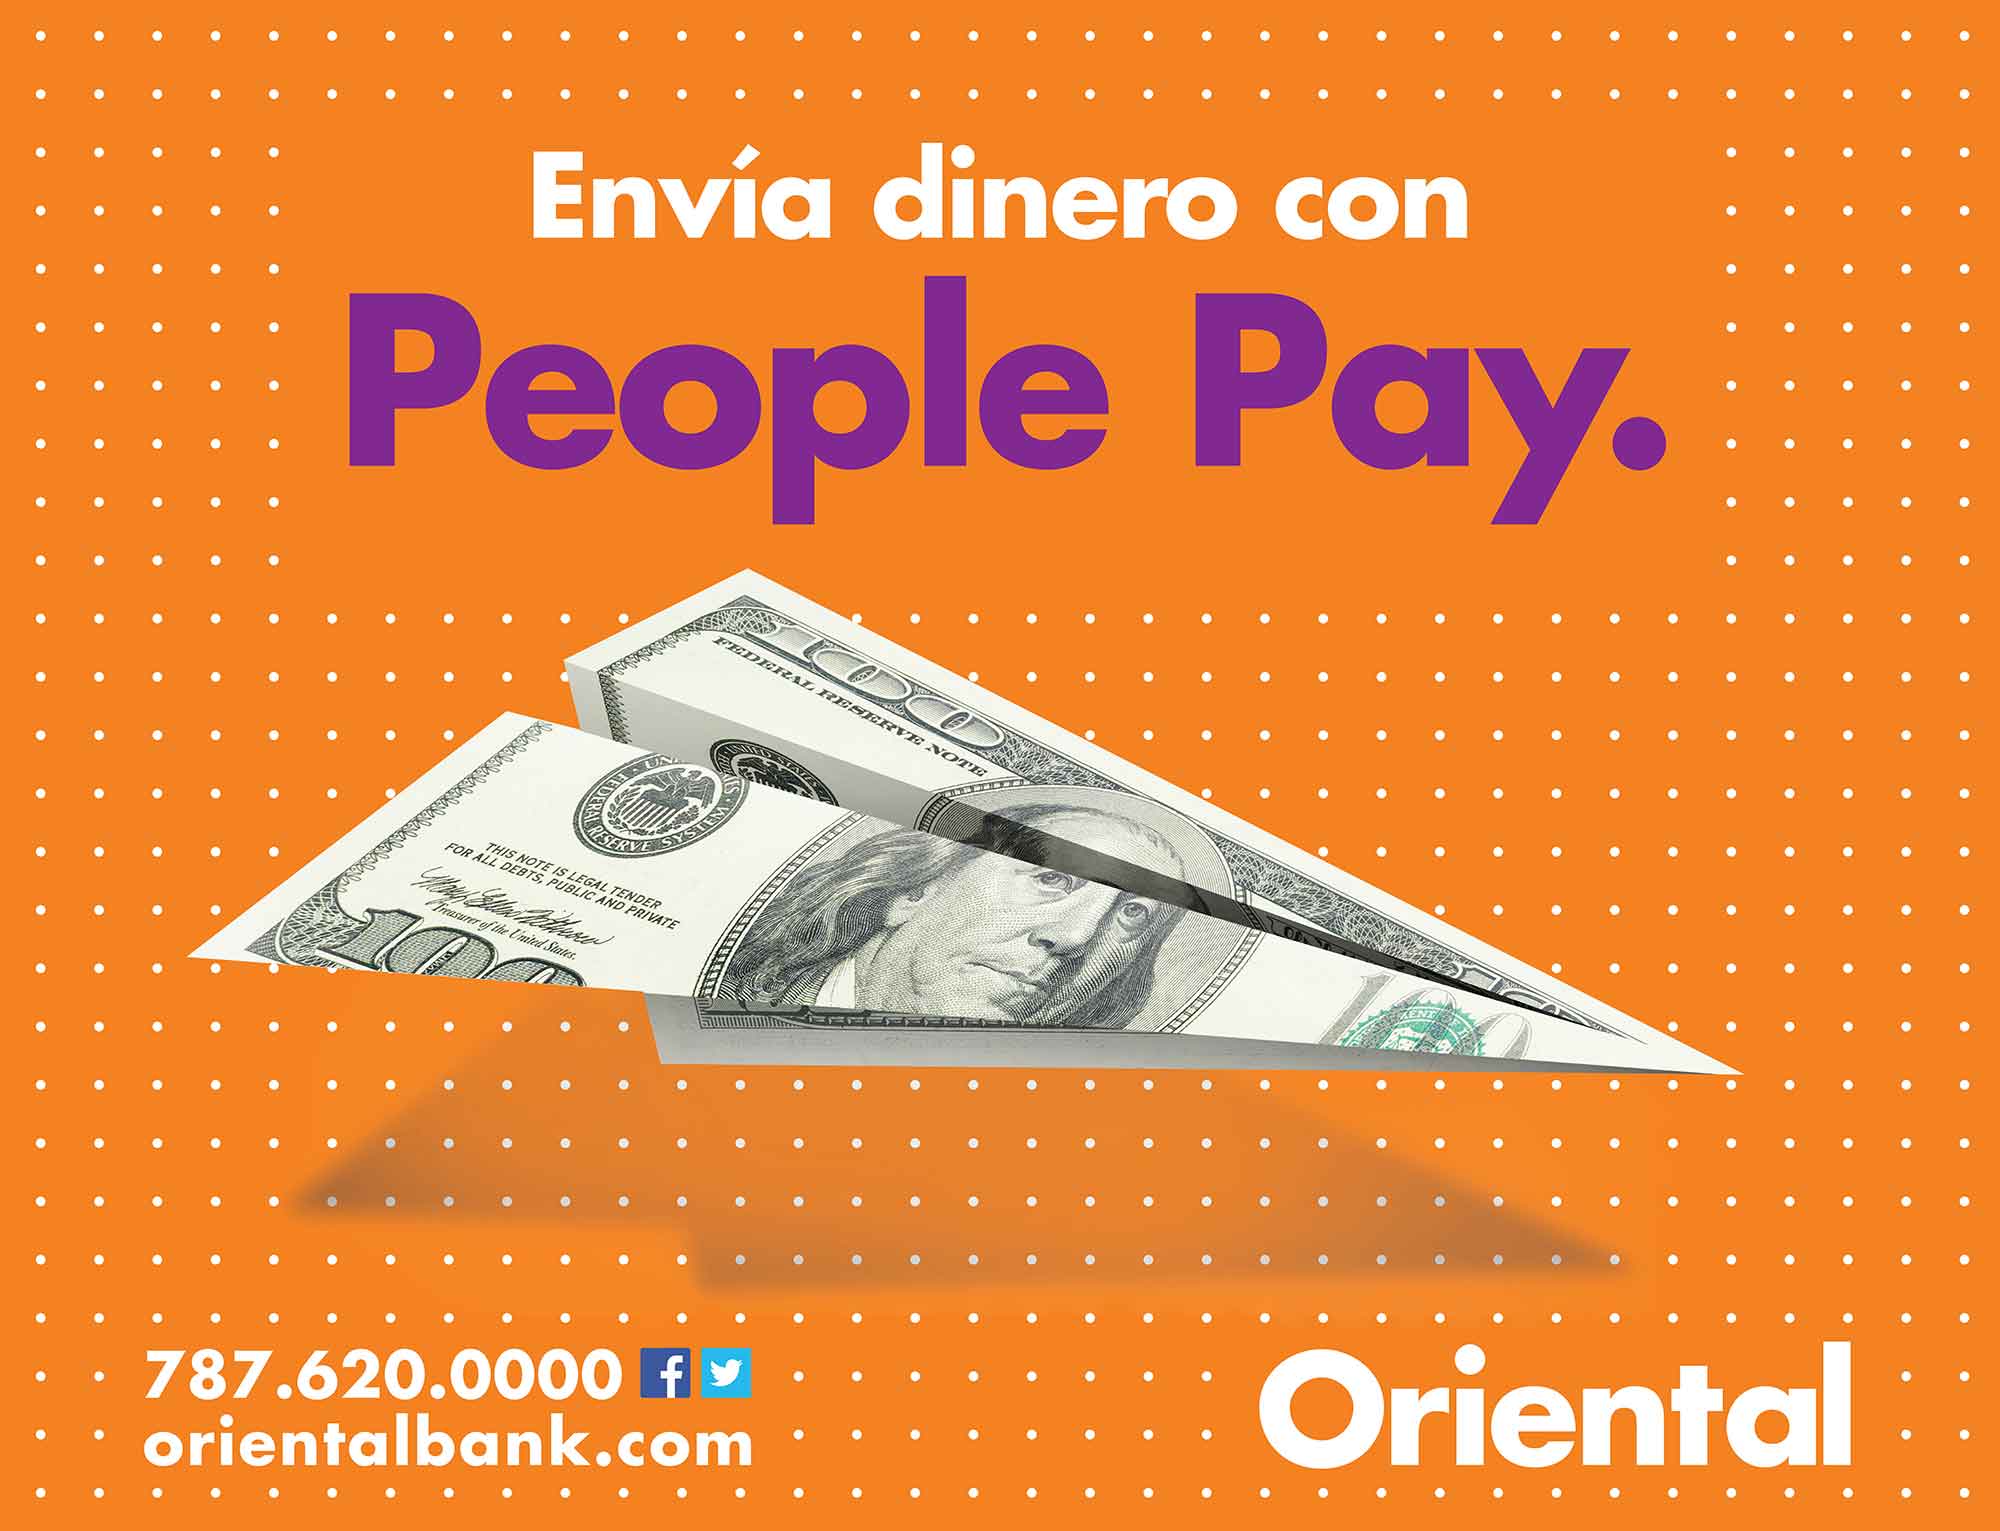 People Pay Print Ad